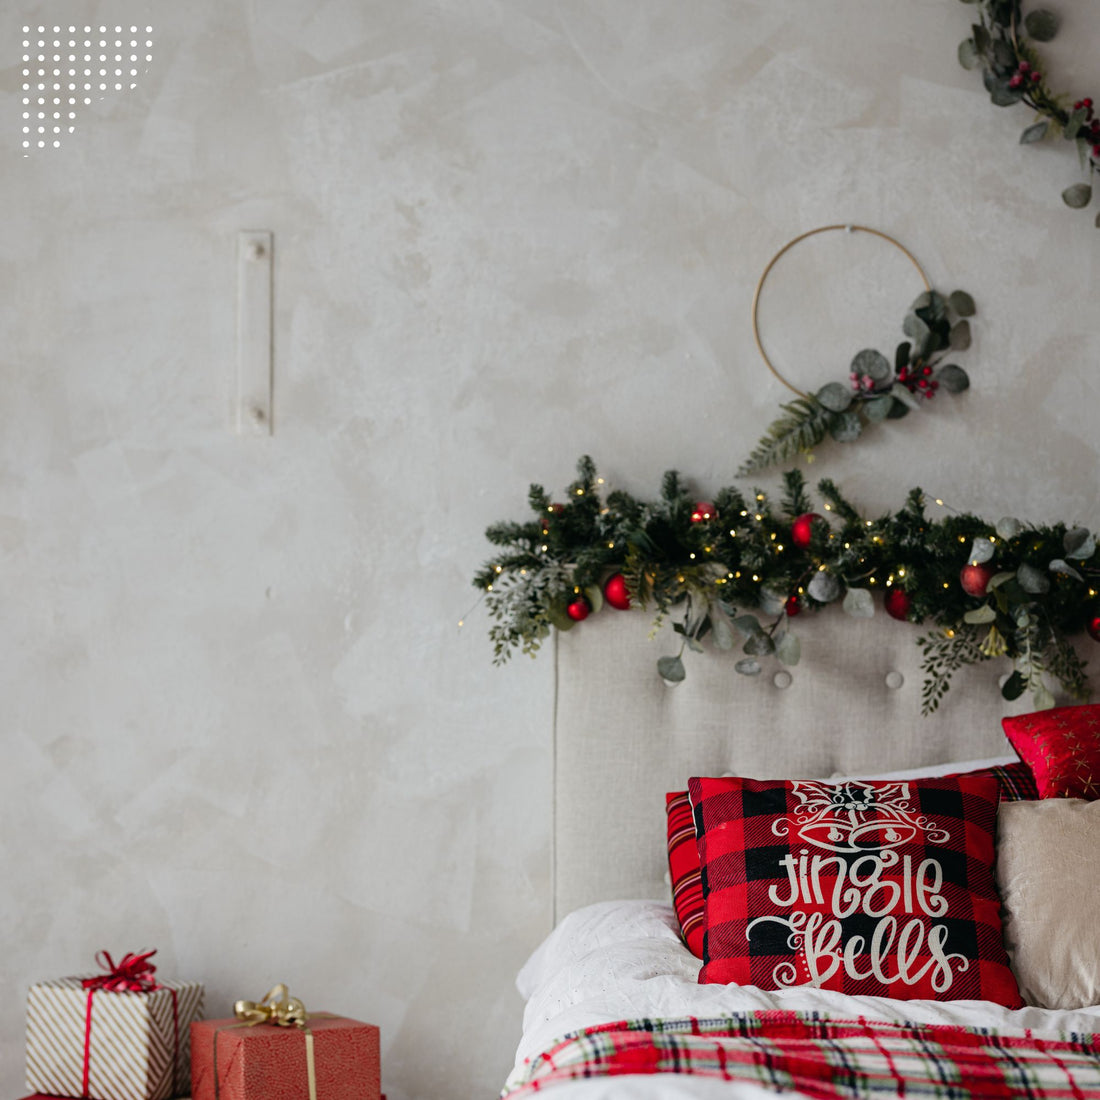 How to bring joy to your room this Christmas!